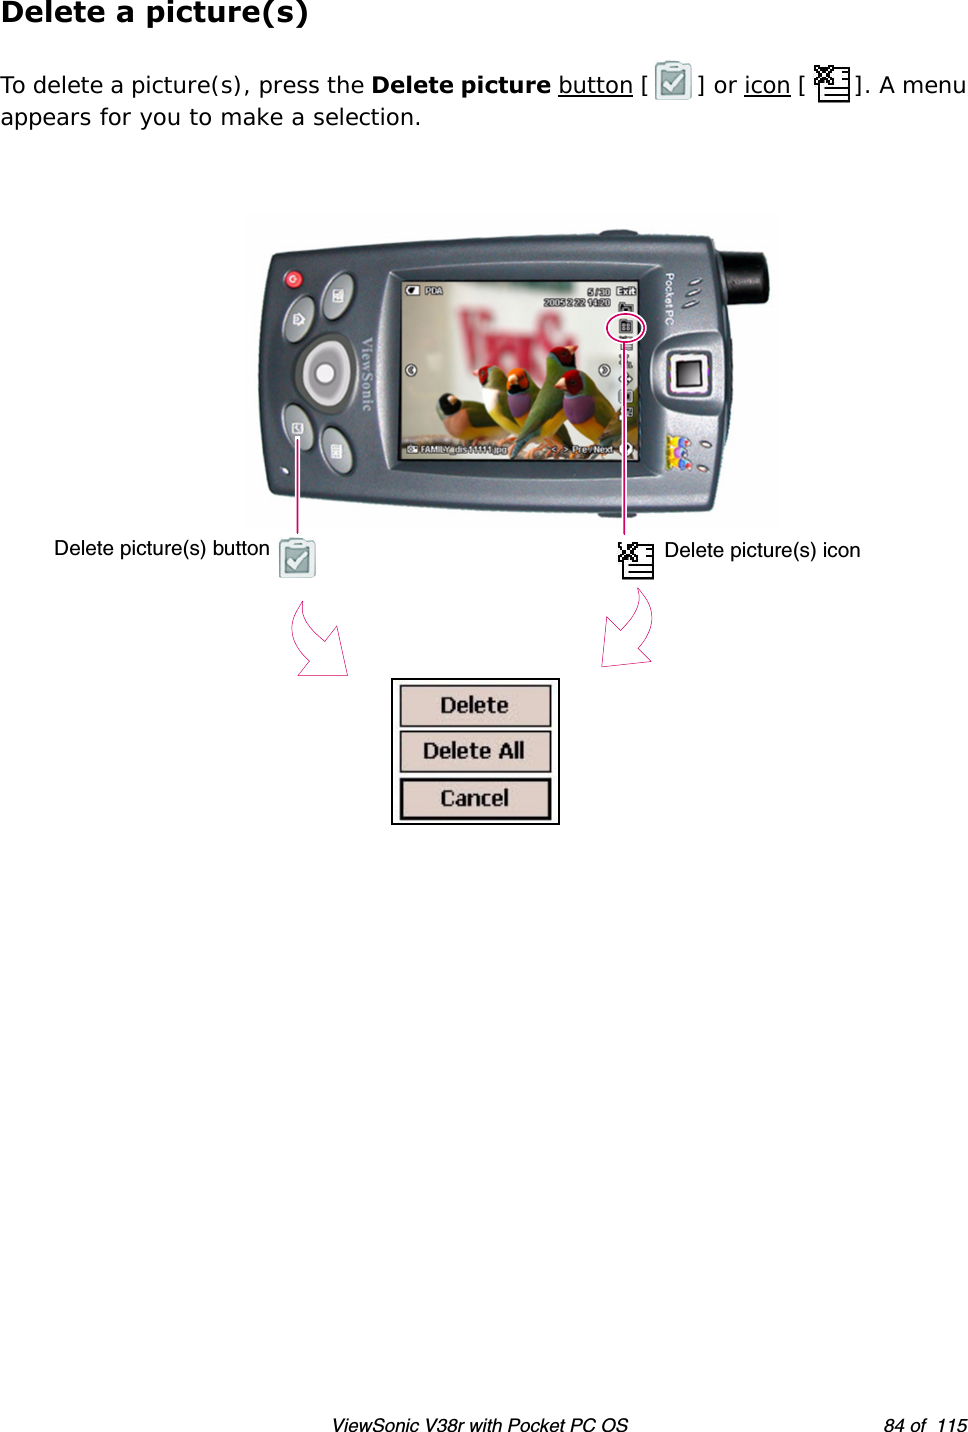 ViewSonic V38r with Pocket PC OS 84 of  115Delete a picture(s)To delete a picture(s), press the Delete picture button [ ] or icon [ ]. A menu appears for you to make a selection. Delete picture(s) button Delete picture(s) icon